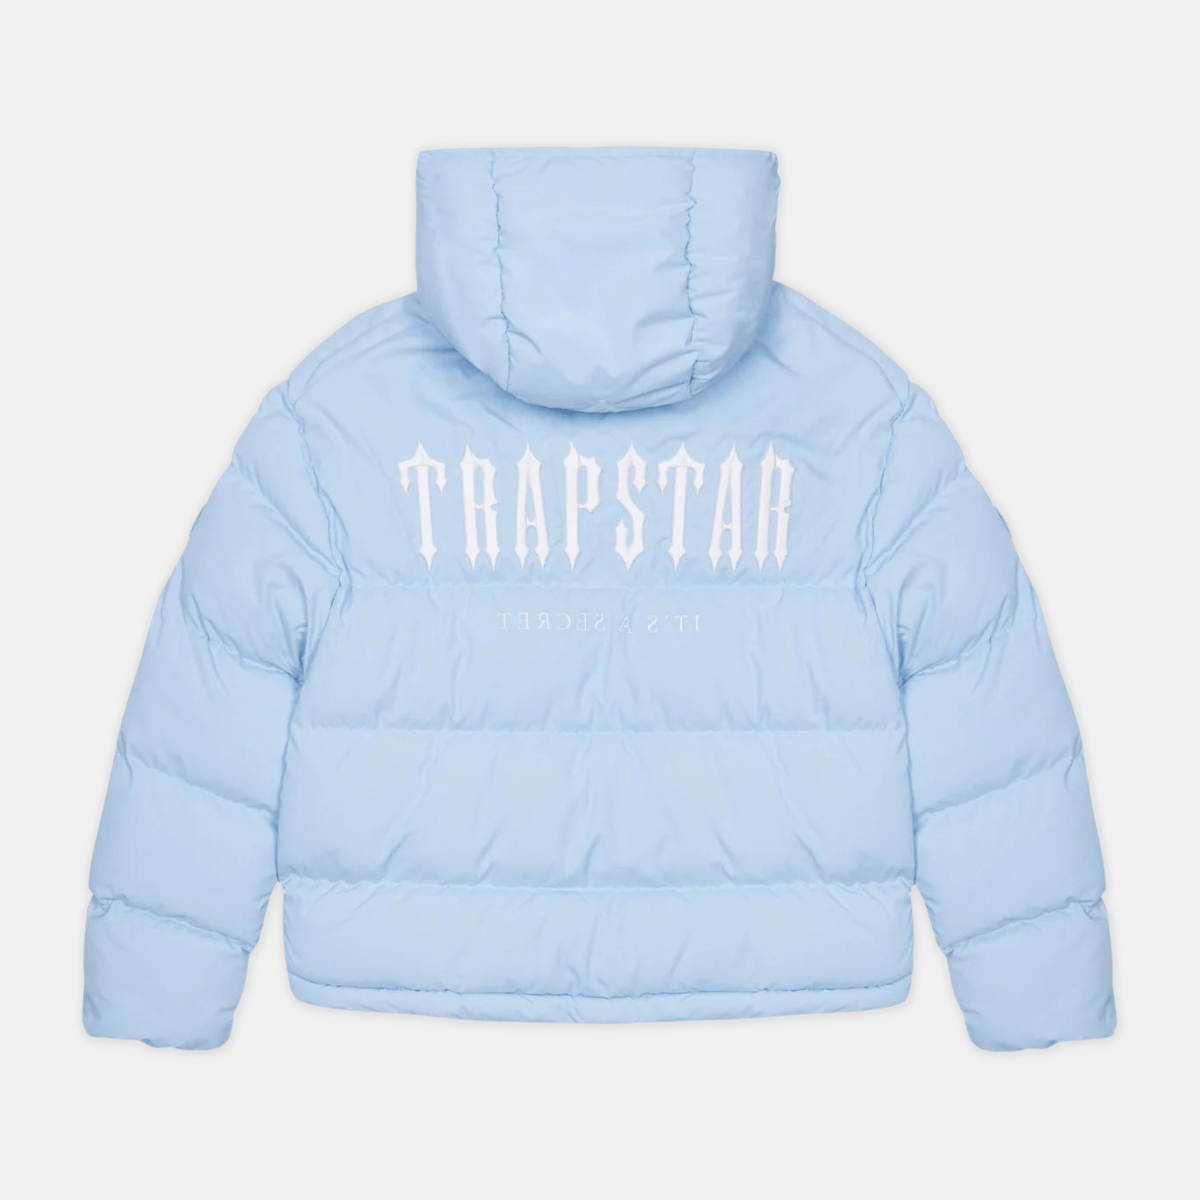 Trapstar Decoded Hooded Puffer 2.0 Jacket - Ice Blue - No Sauce The Plug